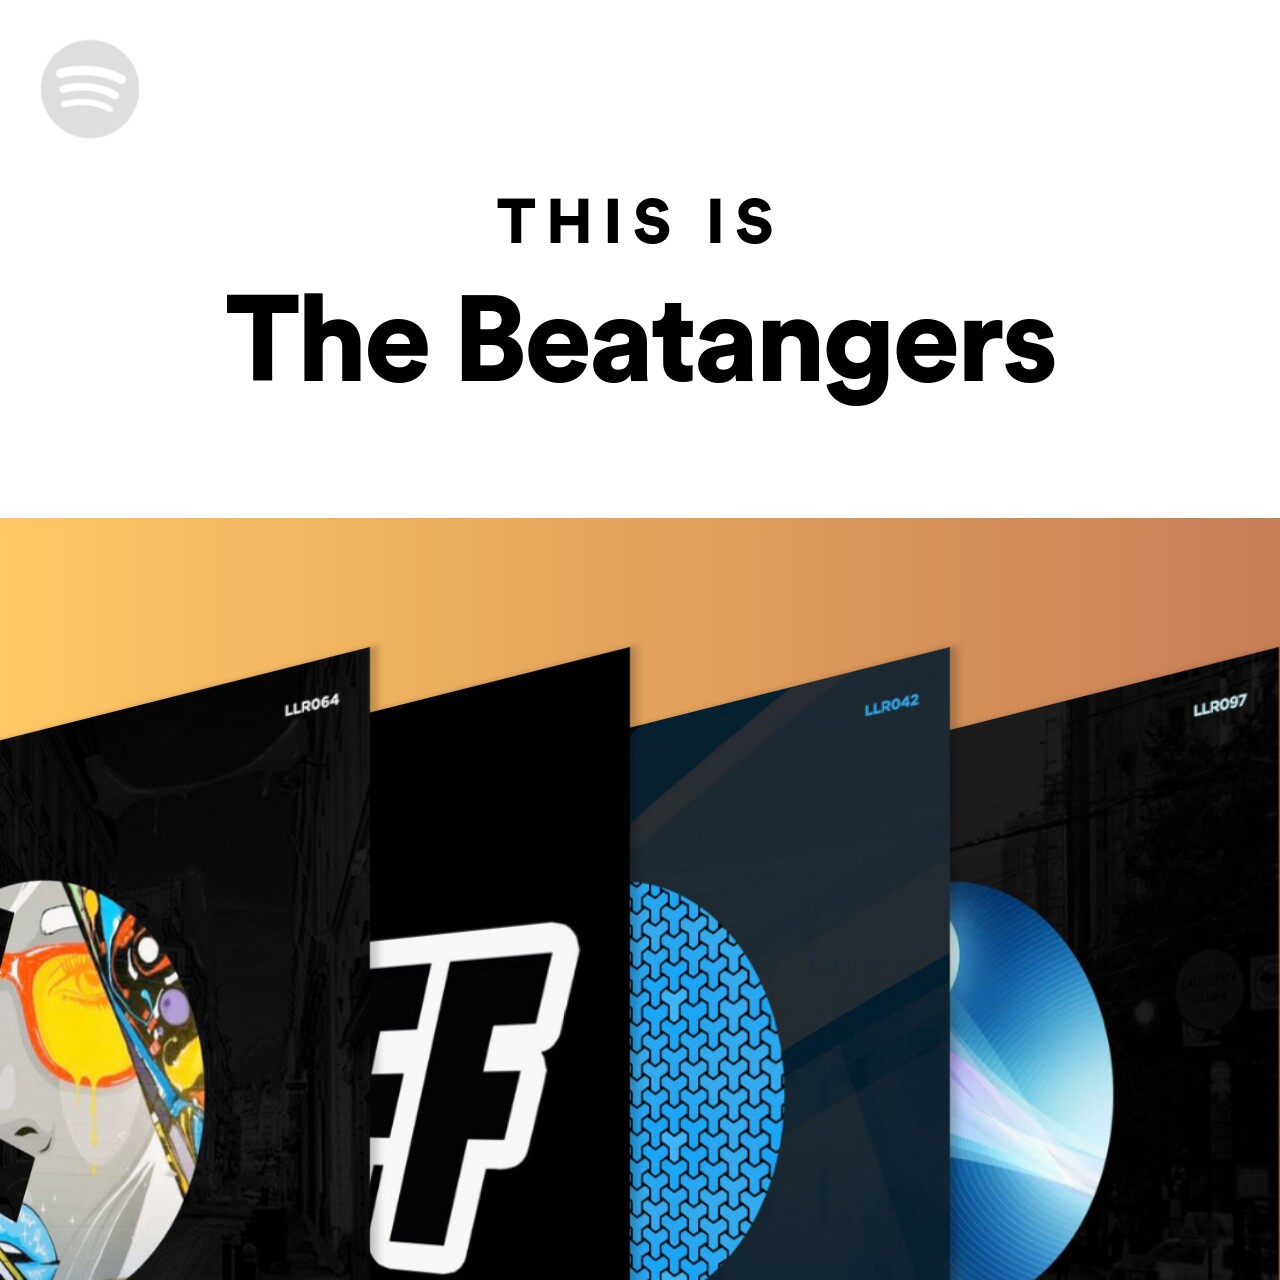 This Is The Beatangers